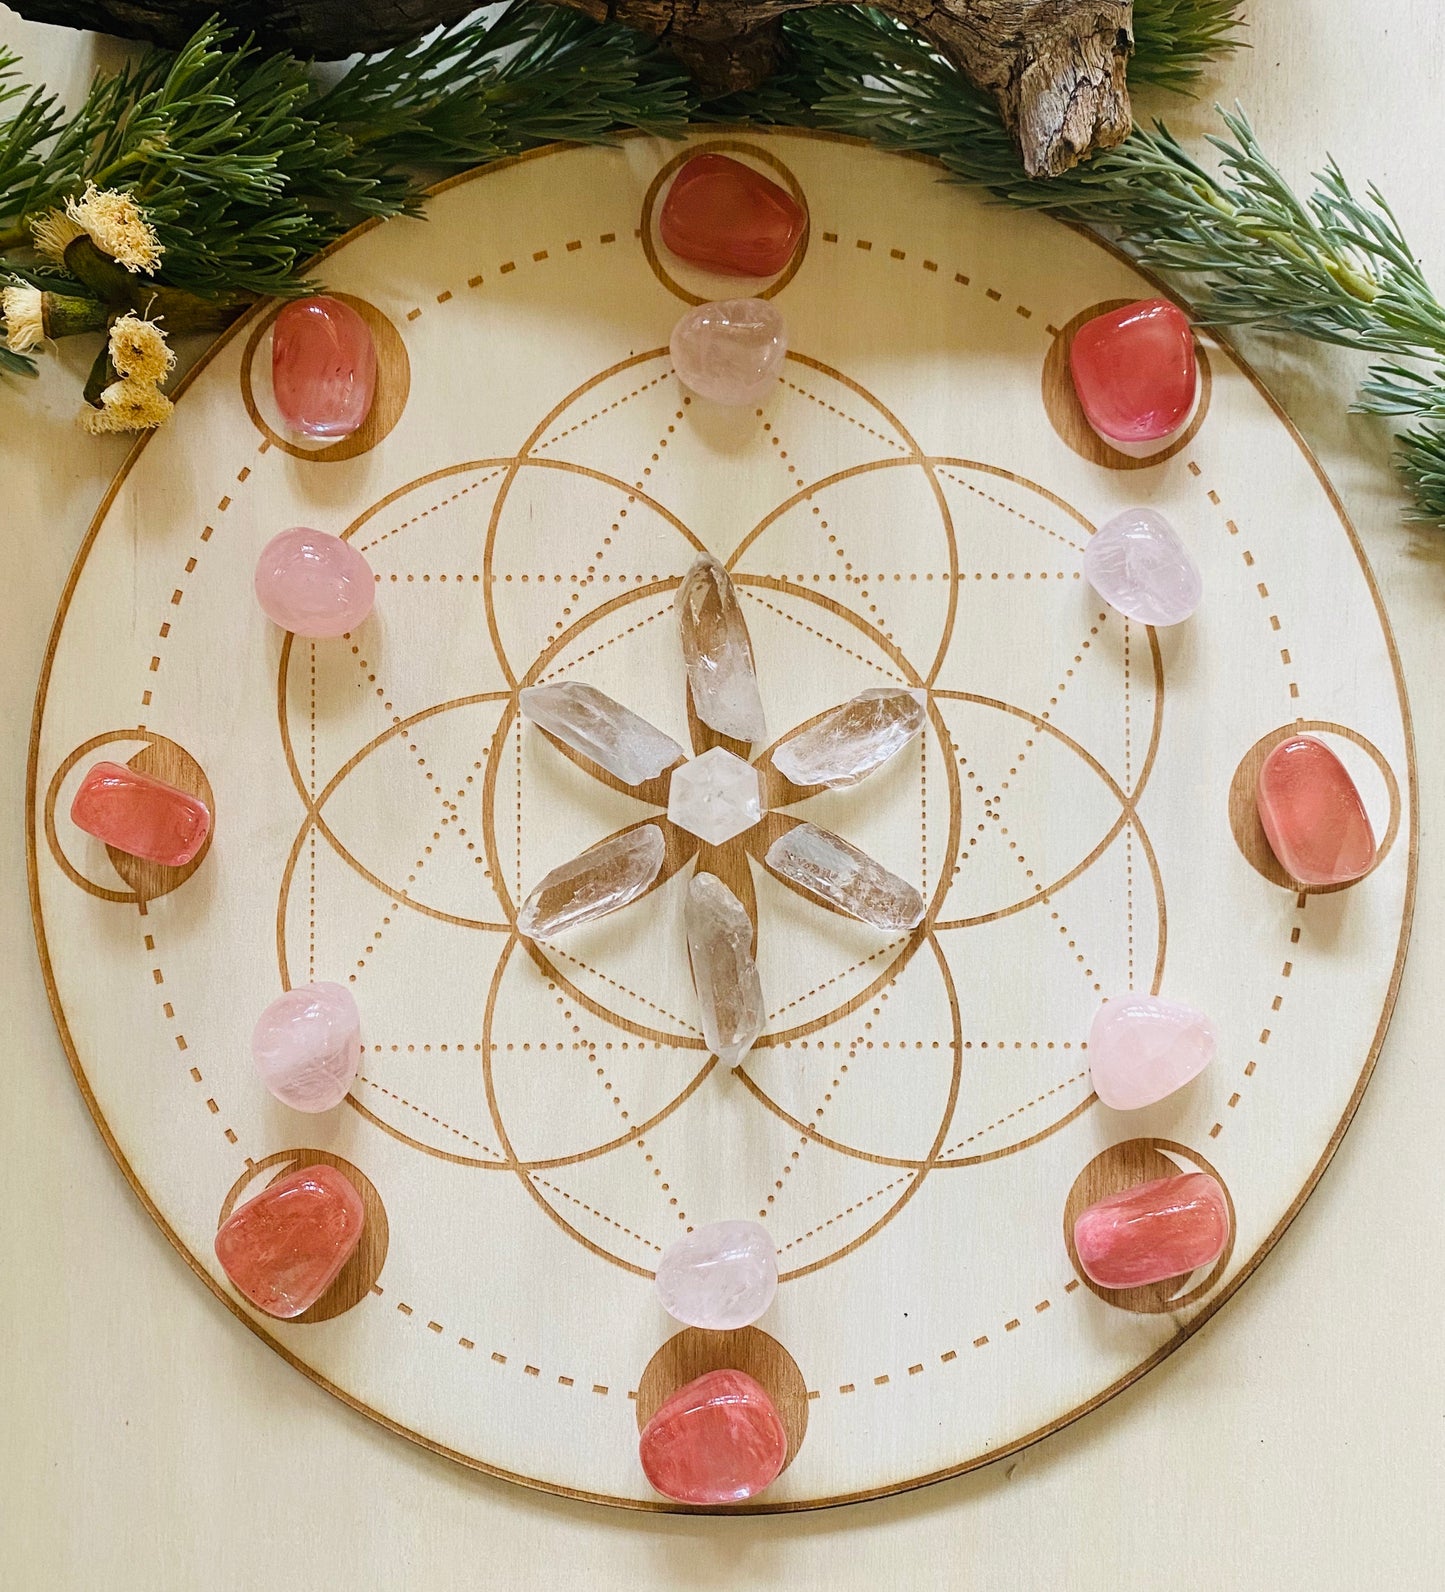 CRYSTAL GRIDS || SEED OF LIFE BOARD